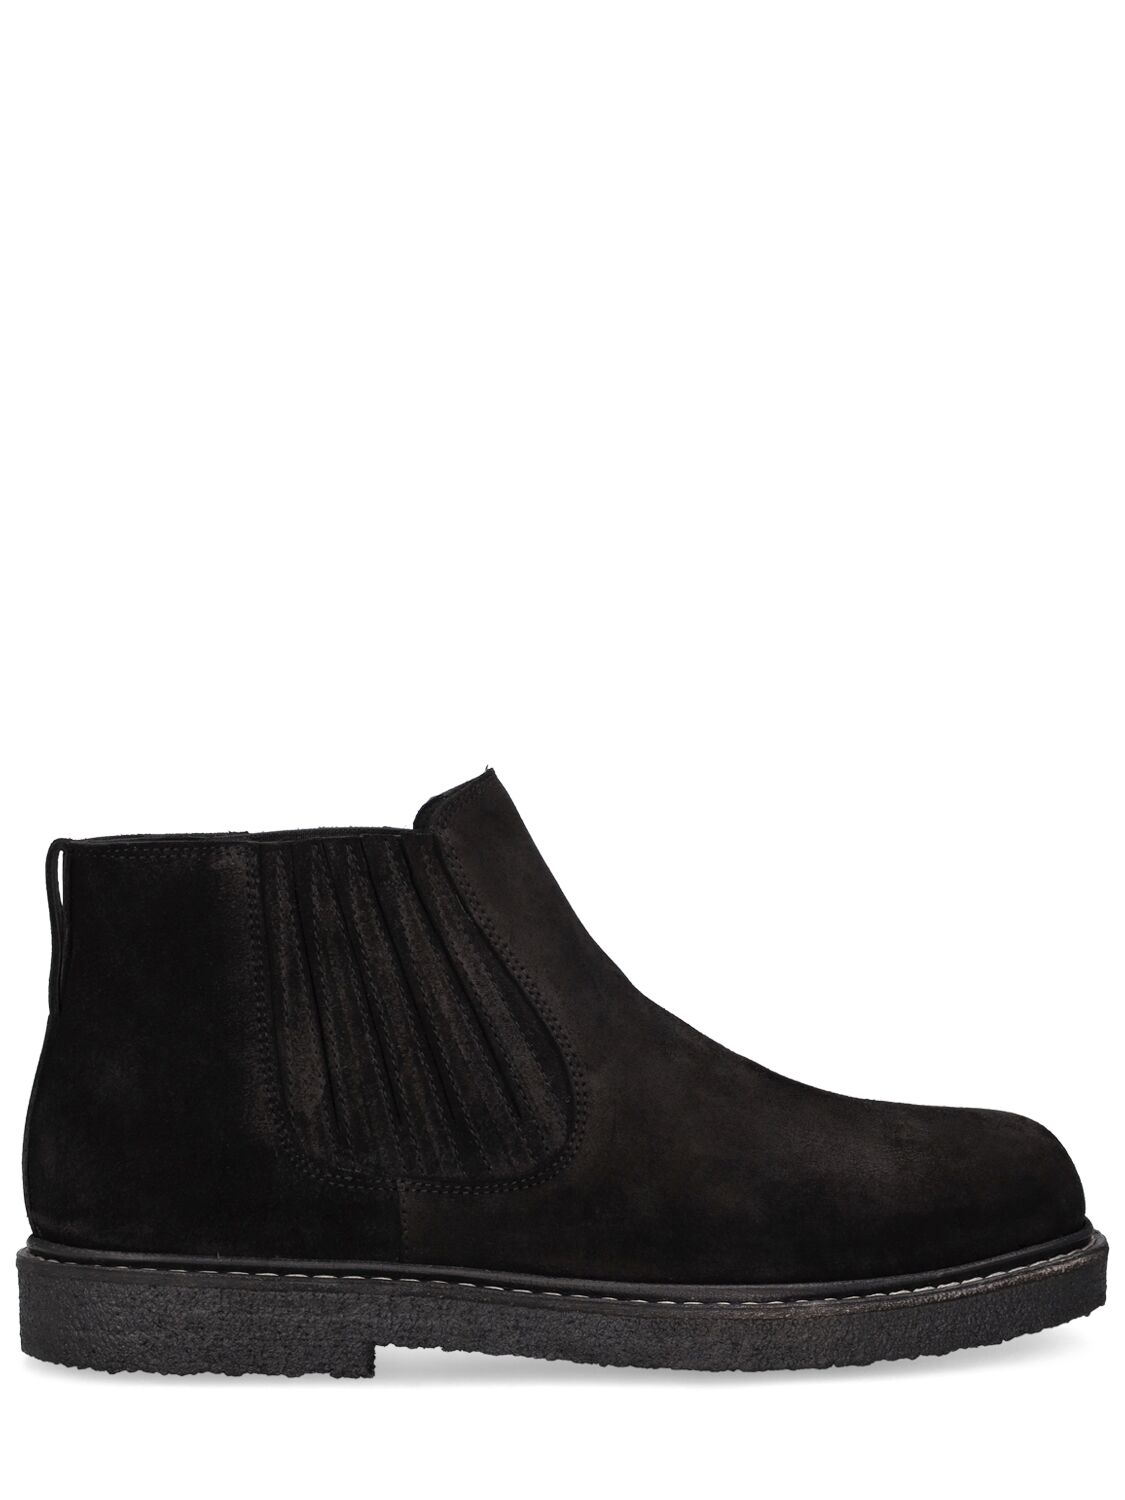 Image of Suede Chelsea Boots